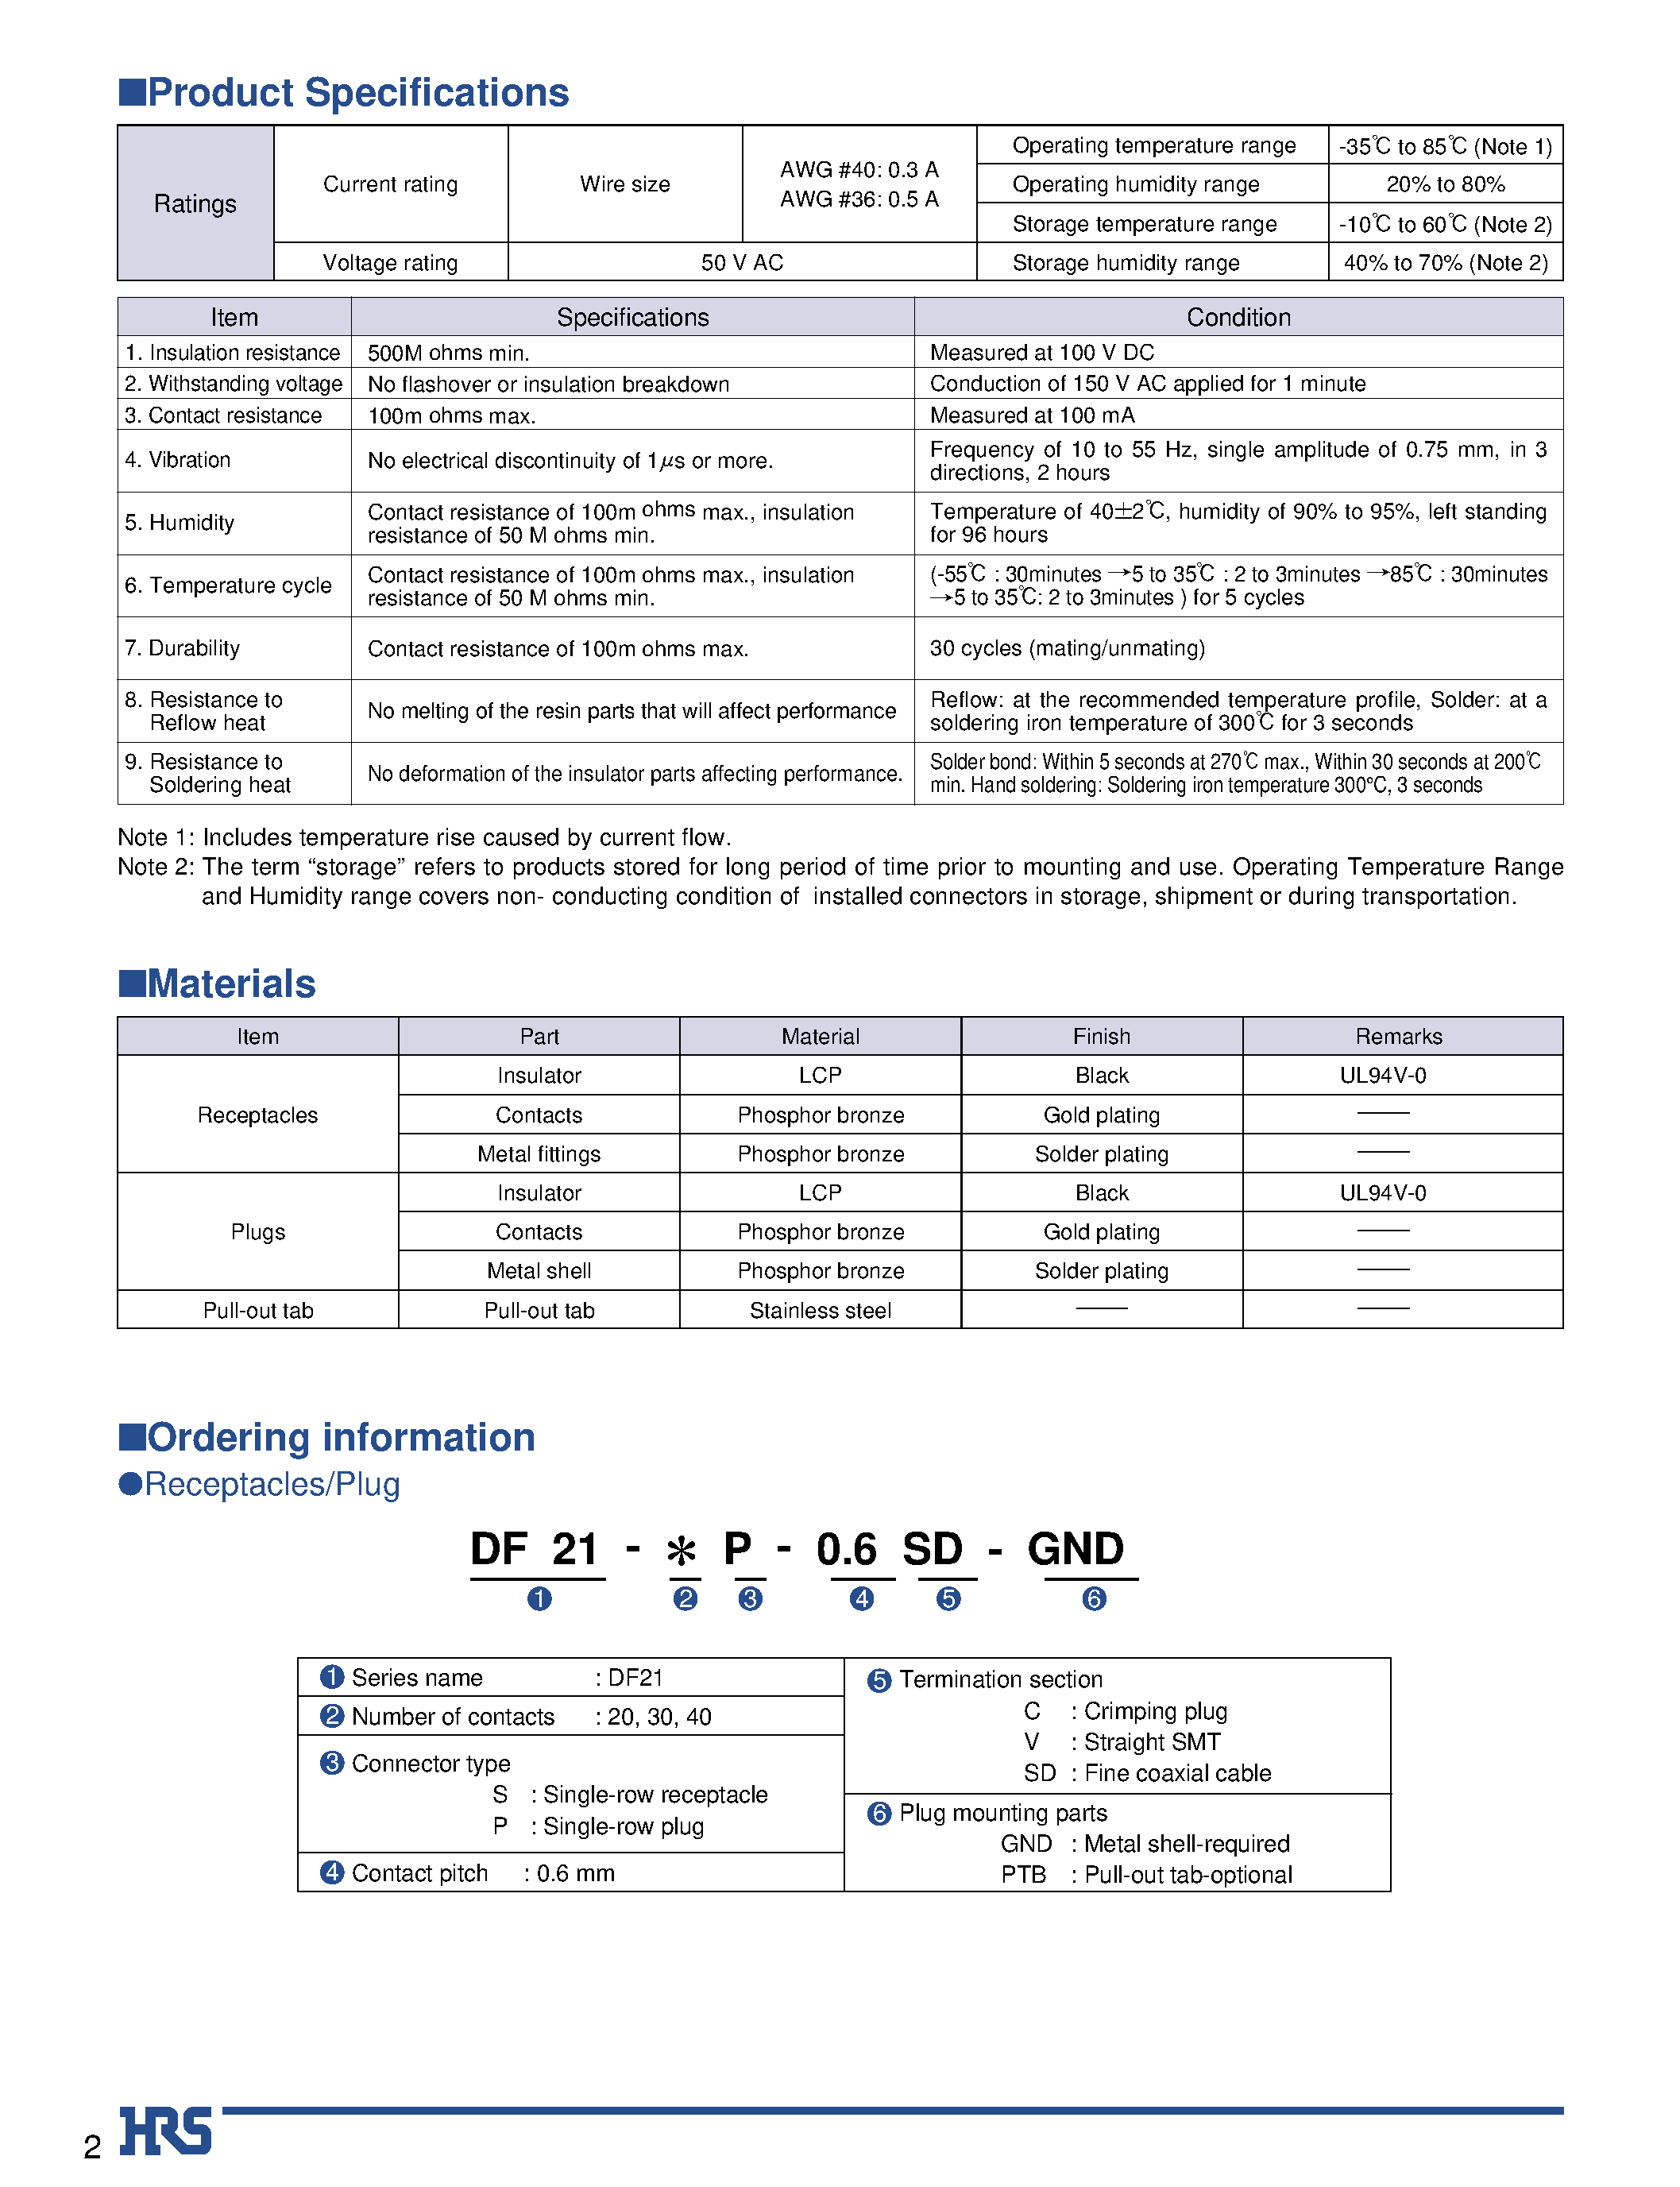 Datasheet DF21-20S-0.6V - 0.6mm Pitch Board-to-Fine-Coaxial Cable Connectors page 2